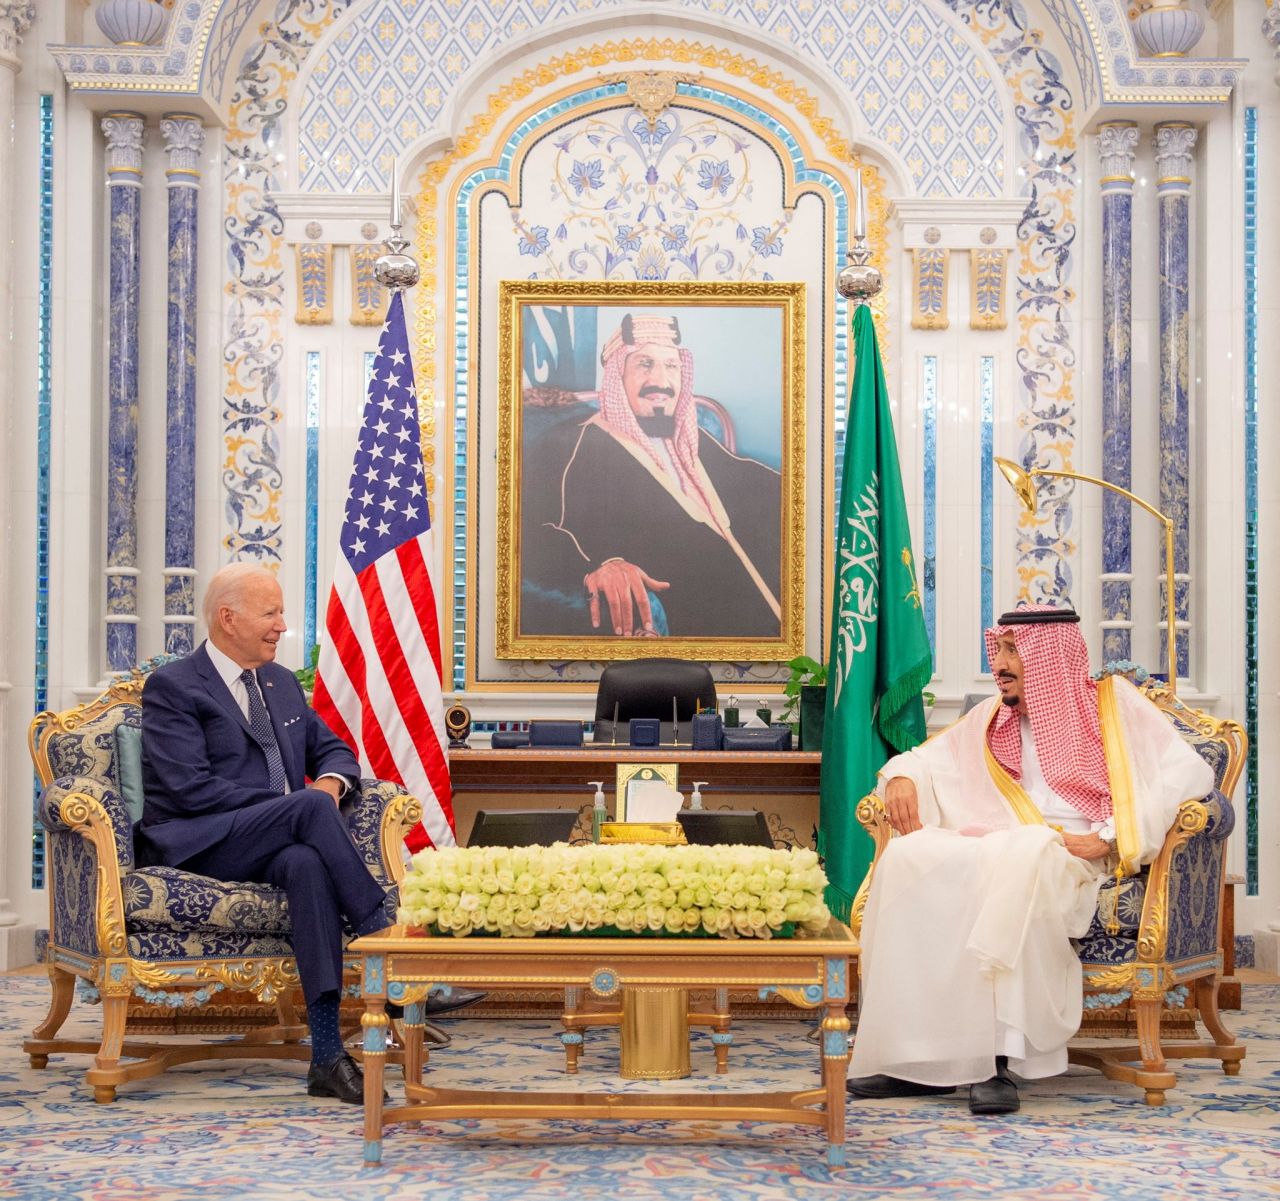 Biden meets with Saudi King Salman at the palace on Friday. But given the King's deteriorating health, the working session was conducted by the Crown Prince.